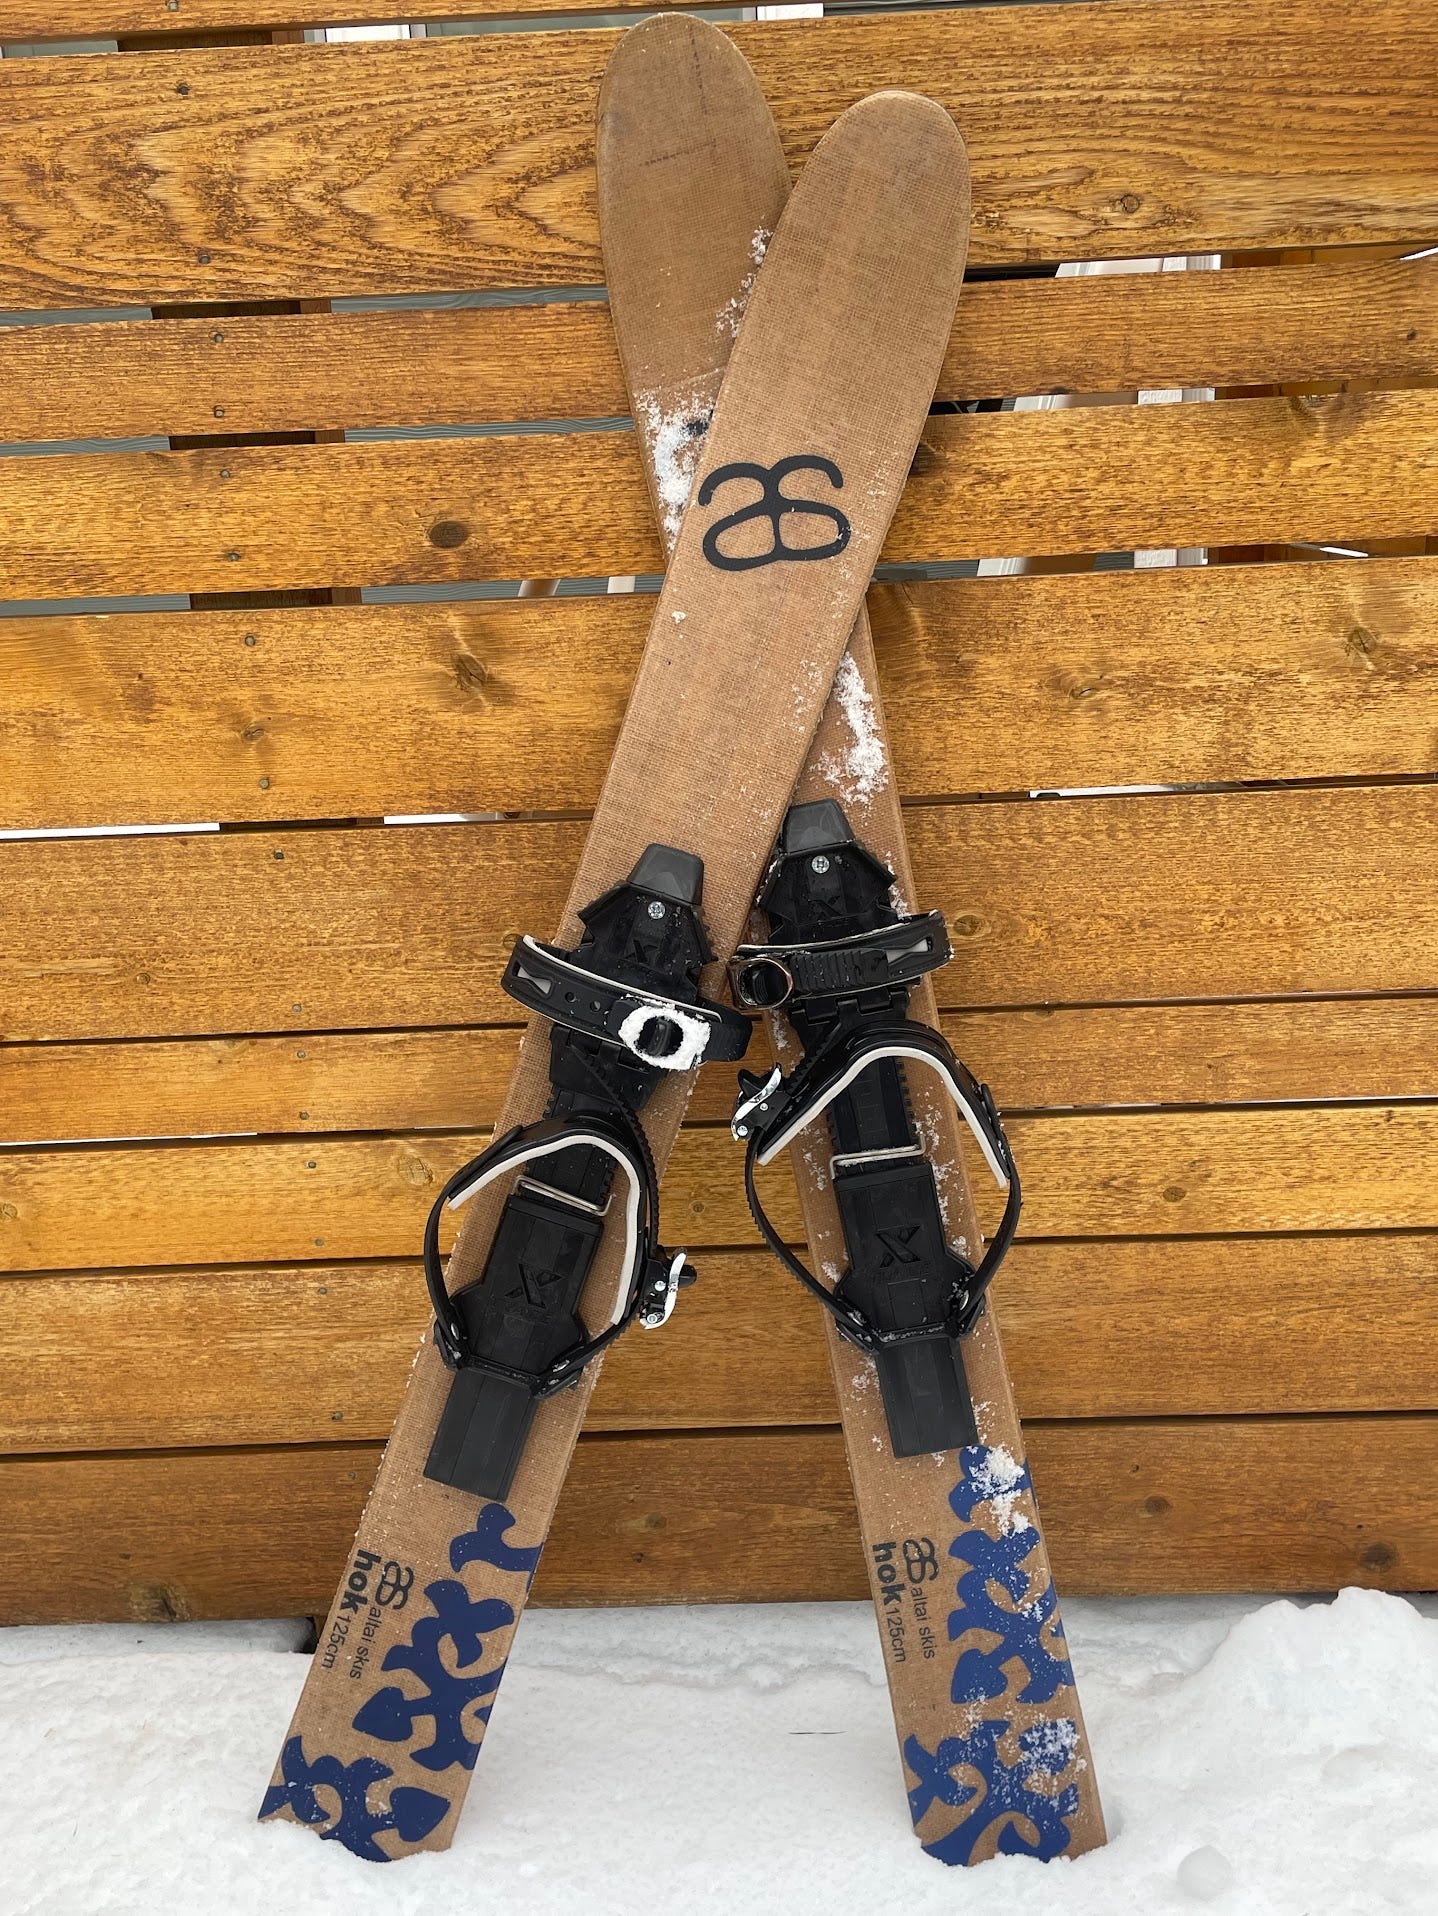 Bridging the Gap: A Comprehensive Review of the Altai Hok Ski with 